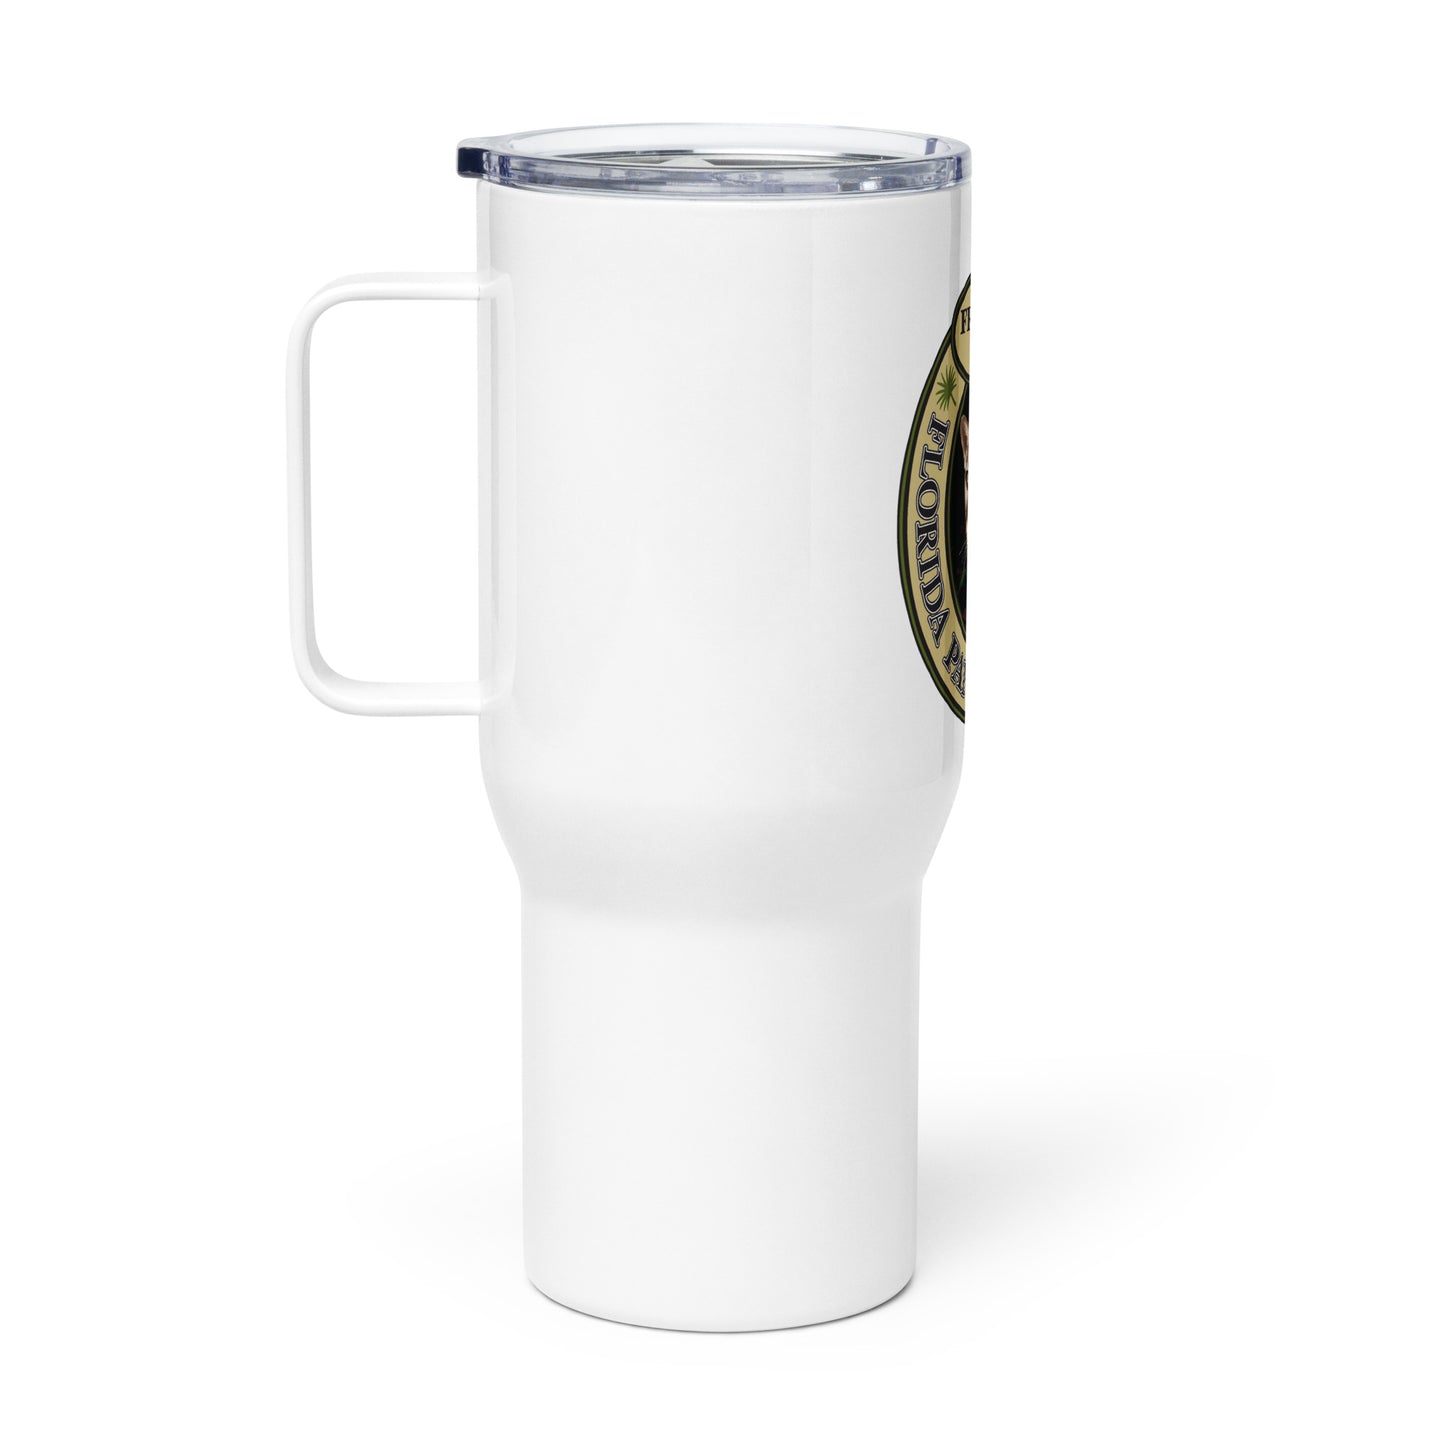 Friends of the Florida Panther Refuge Travel mug with a handle